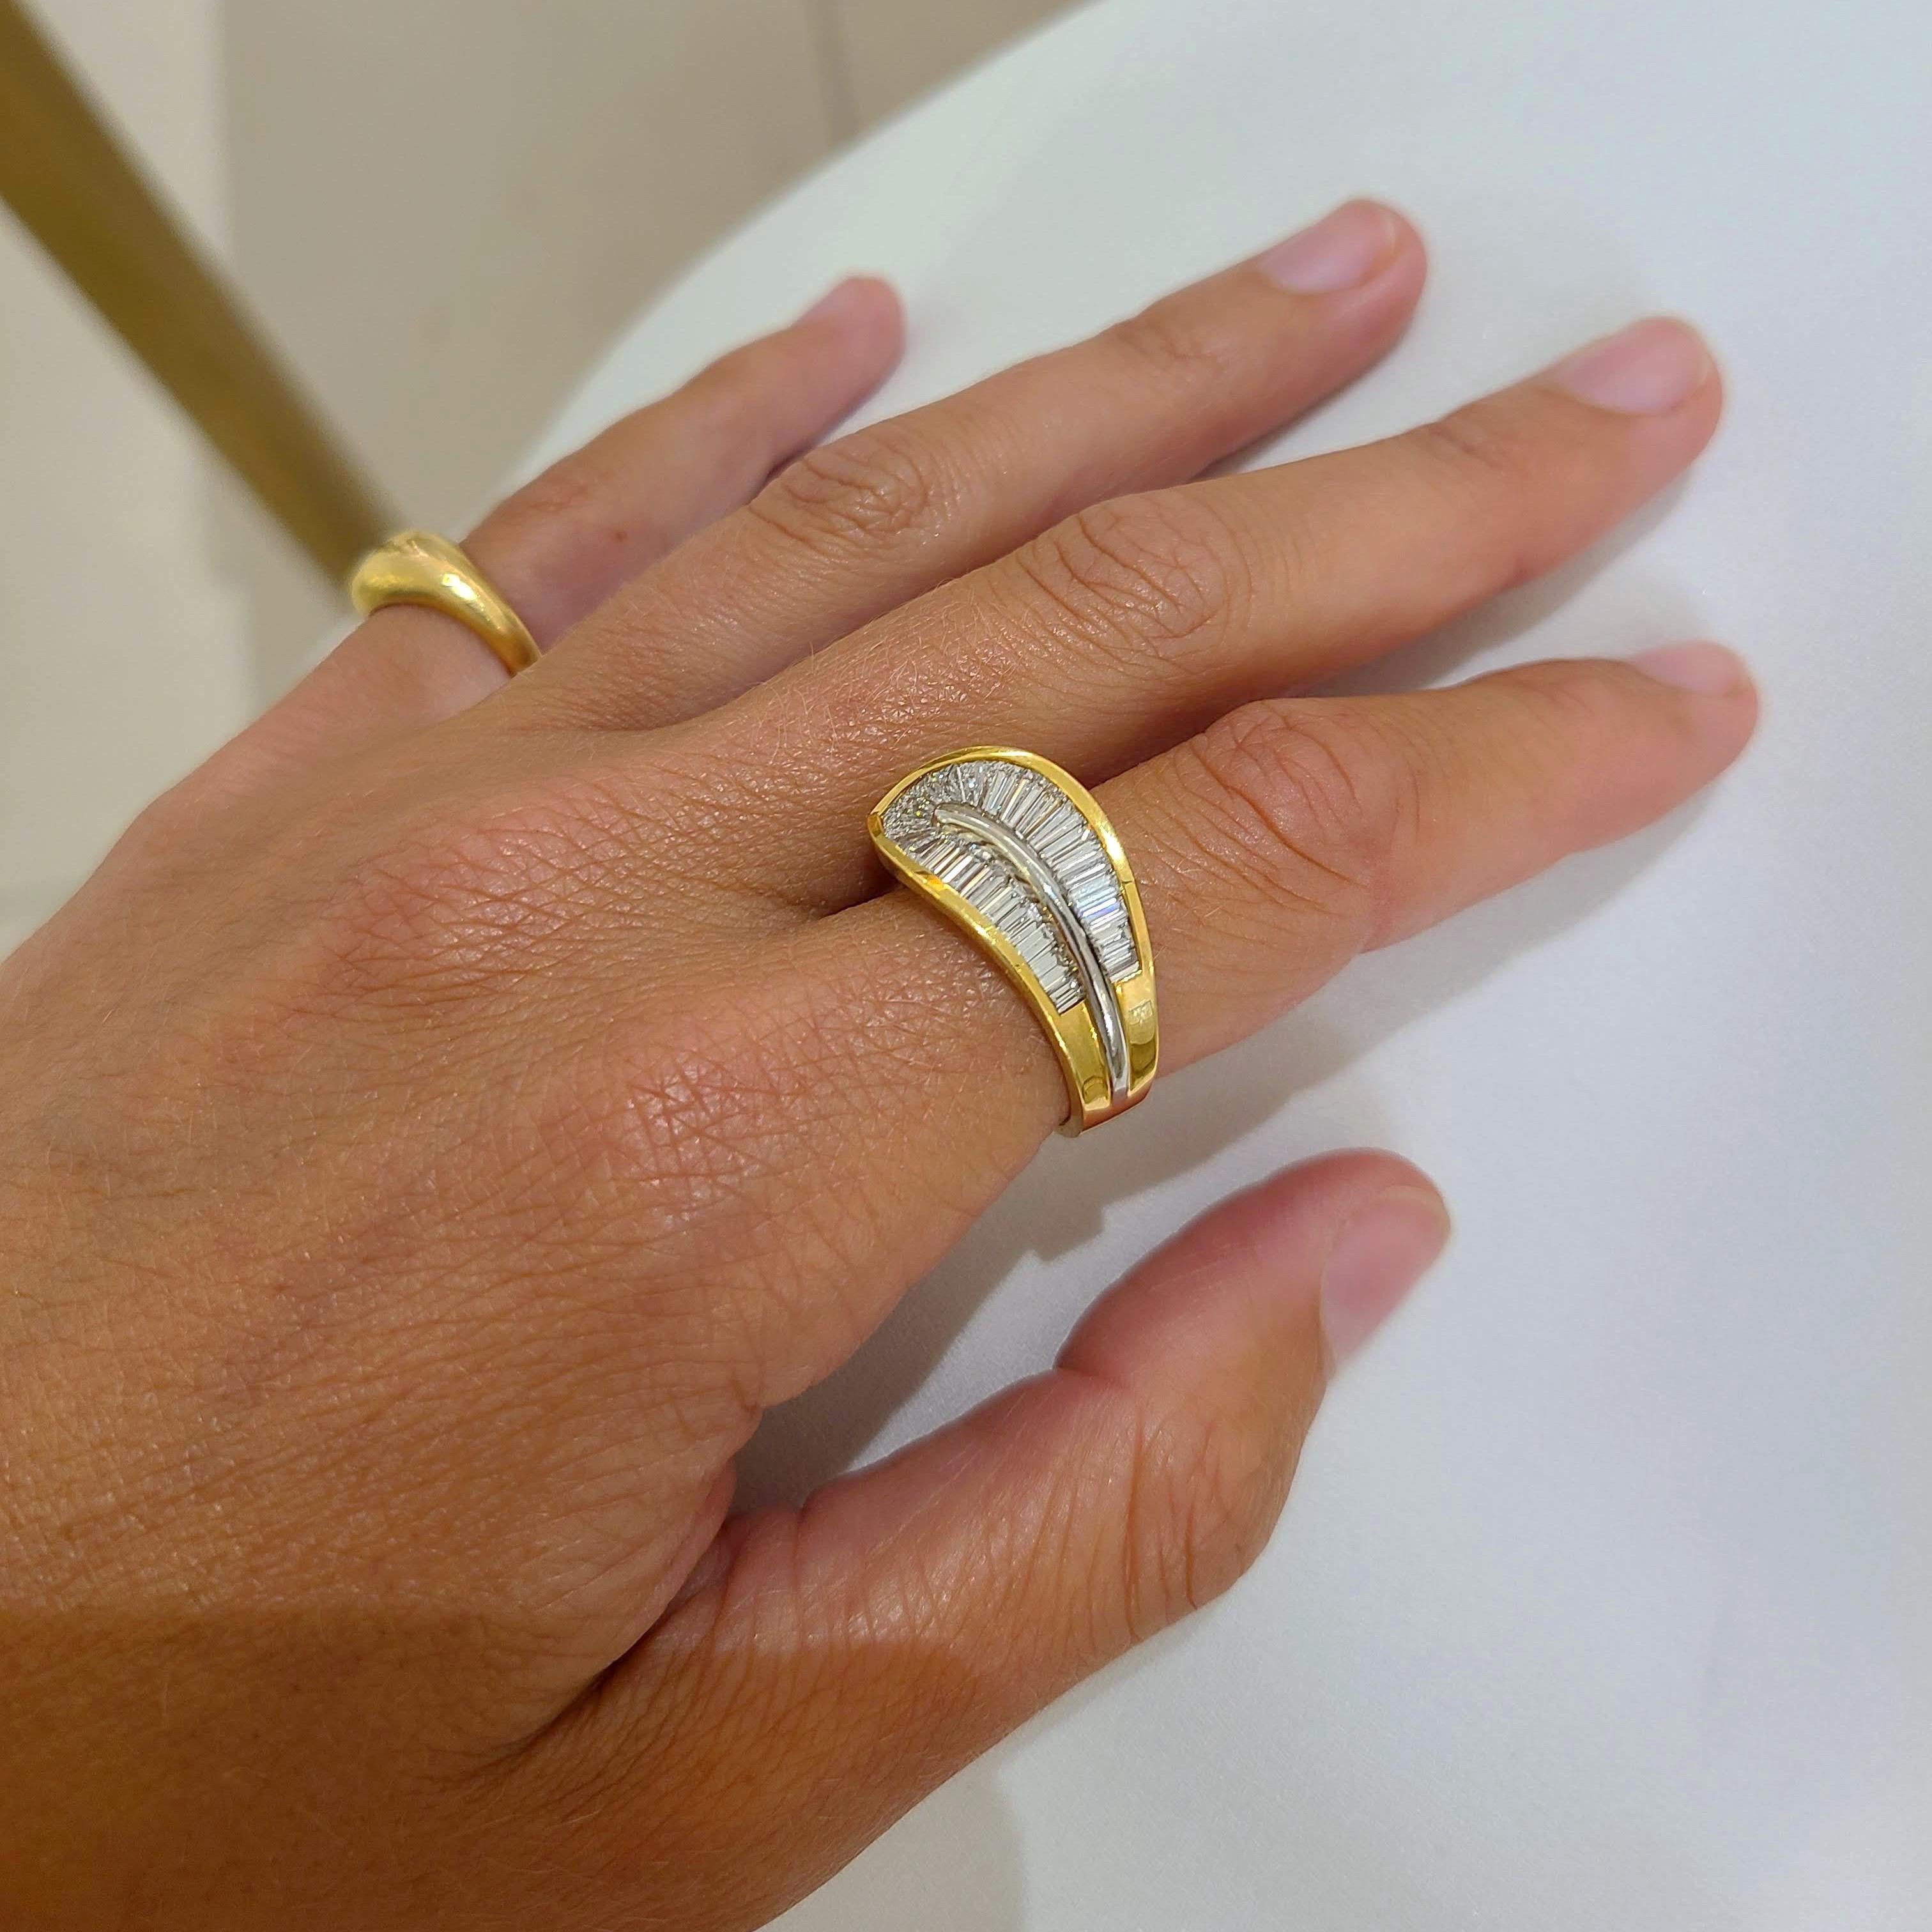 This 18 karat yellow gold and platinum ring was designed by Nova. A unique setting highlights the tapered Baguette Cut Diamonds which are set in two rows that gracefully wrap around the finger.
Ring size 6  sizing options are available
The ring has